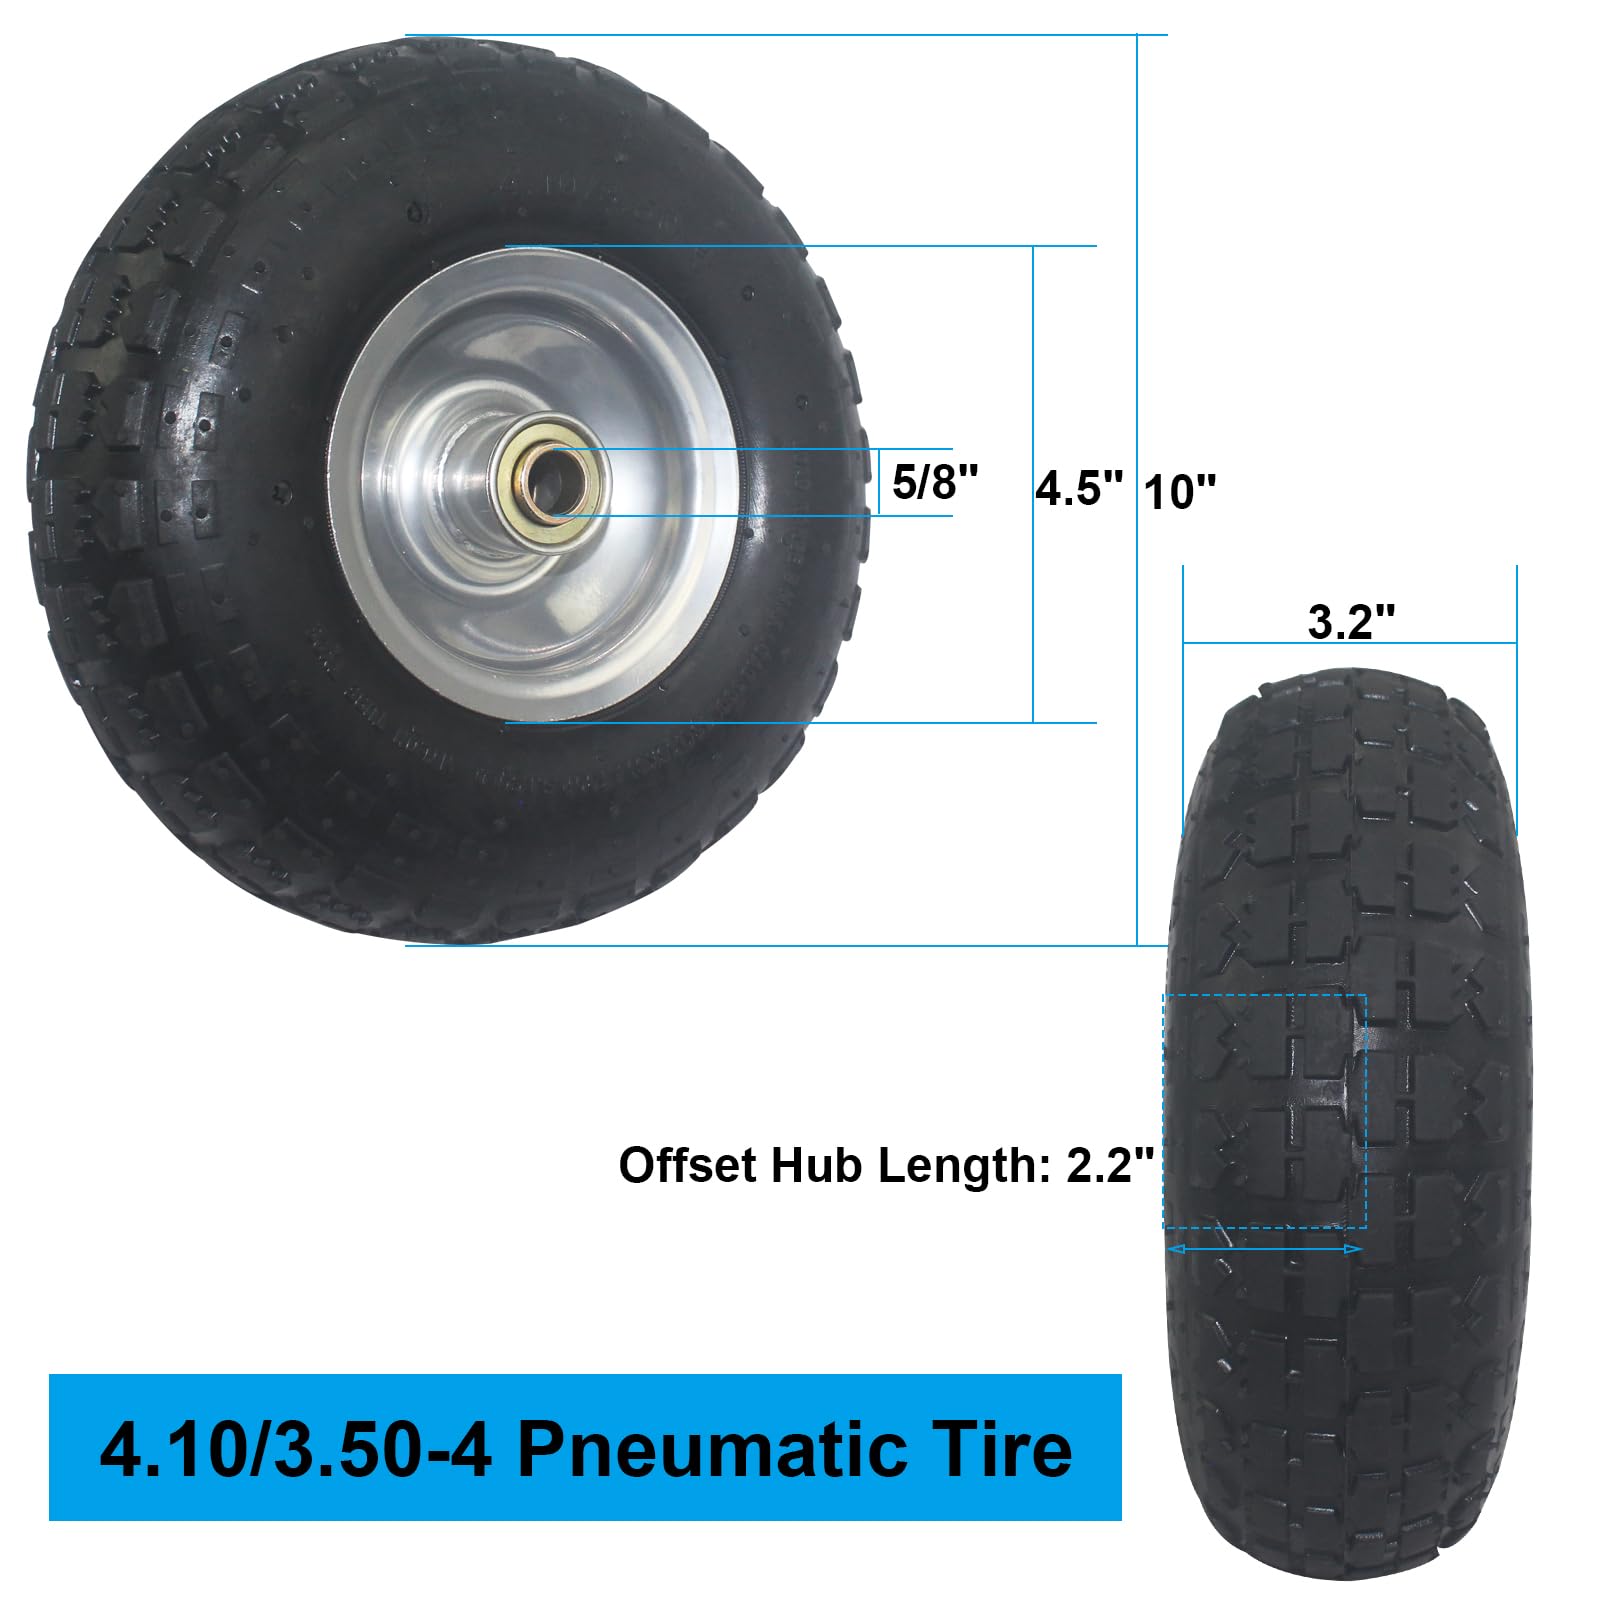 2 Packs 10" Heavy Duty Tire and Wheel, 4.10/3.50-4 Pneumatic Tire Solid Rubber Tire with 2.25" Offset Hub 5/8" Axle Bore Hole and Sealed Bearings for Gorilla Cart Tires/Dolly Wheels/Hand Truck Wheels